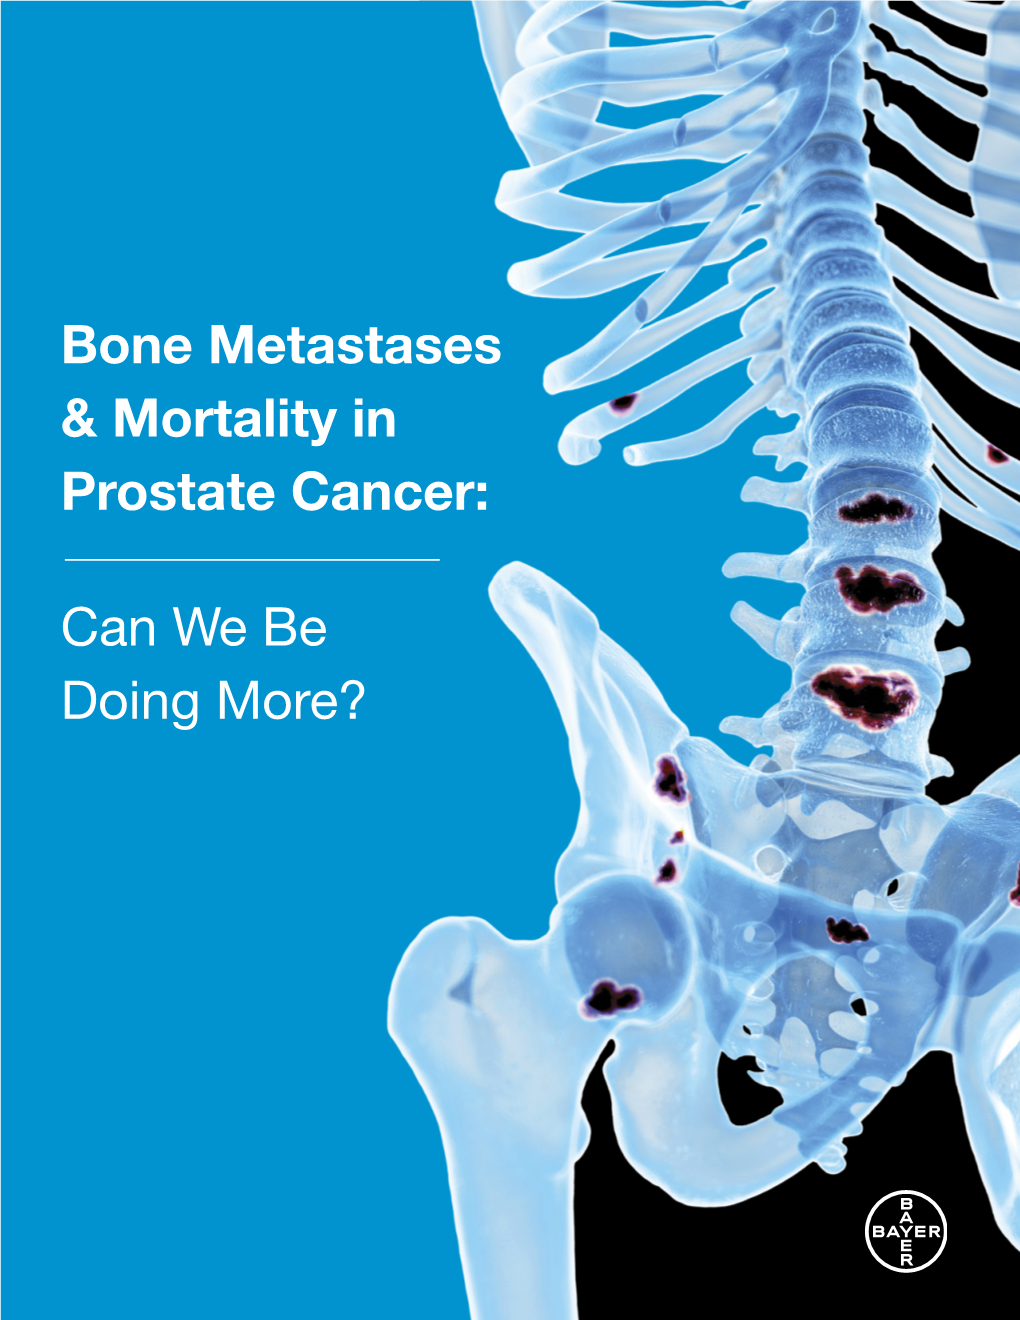 Bone Metastases & Mortality in Prostate Cancer: Can We Be Doing More?